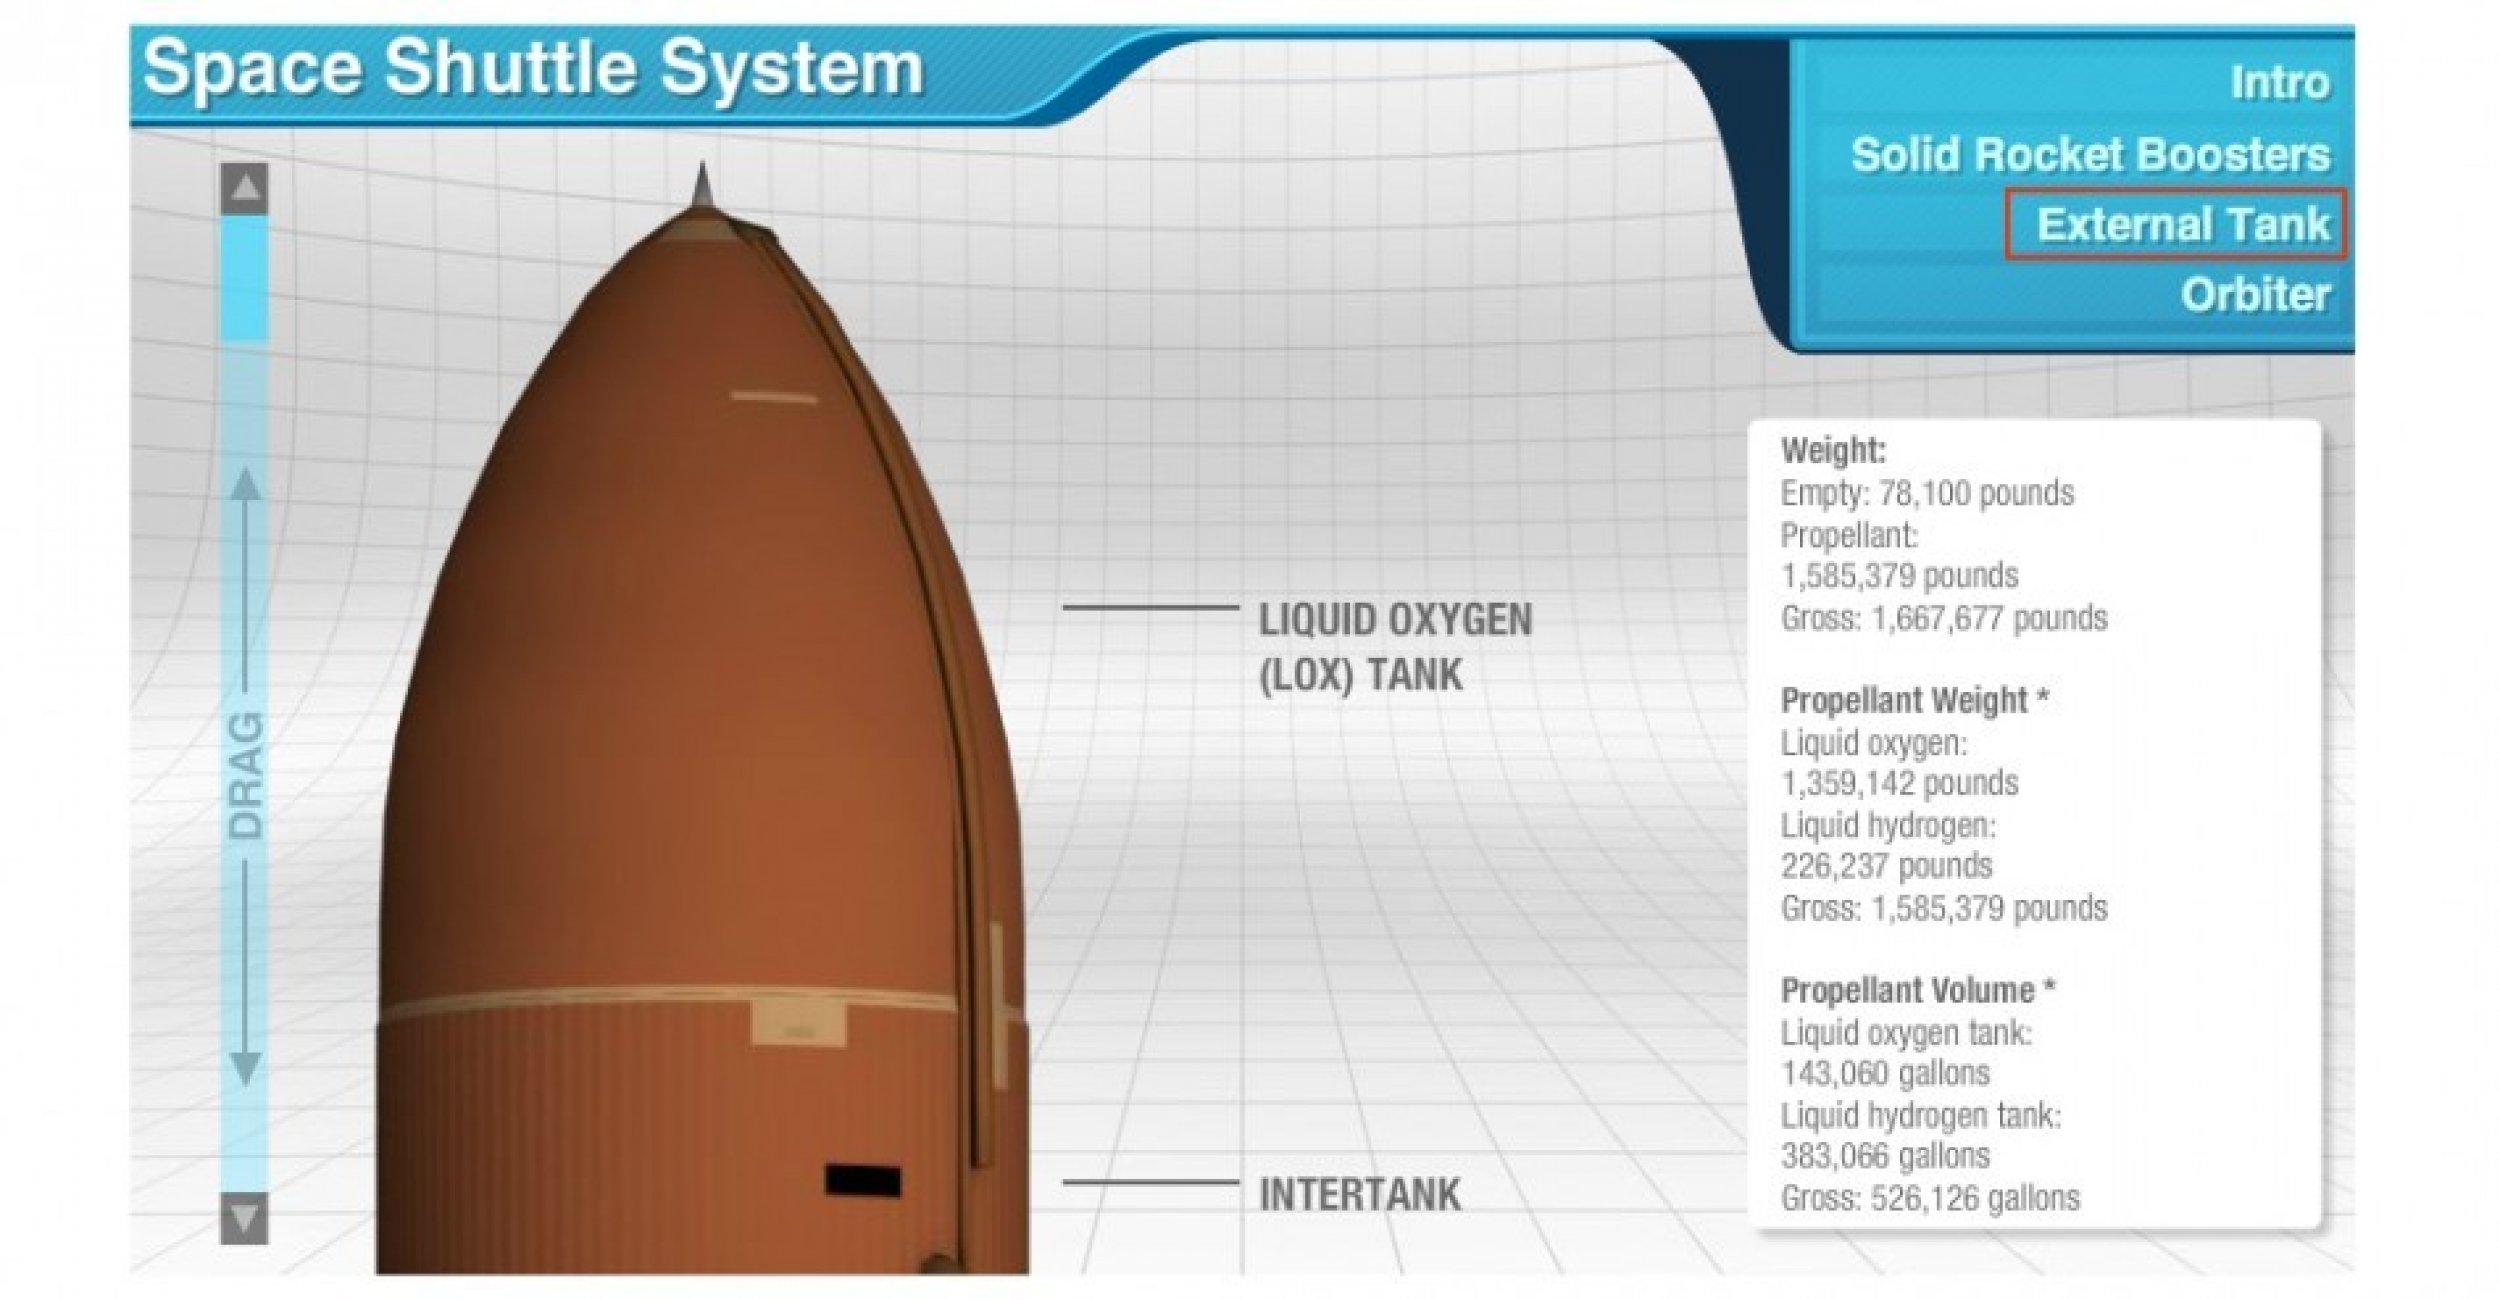 Facts on NASA Space Shuttle System